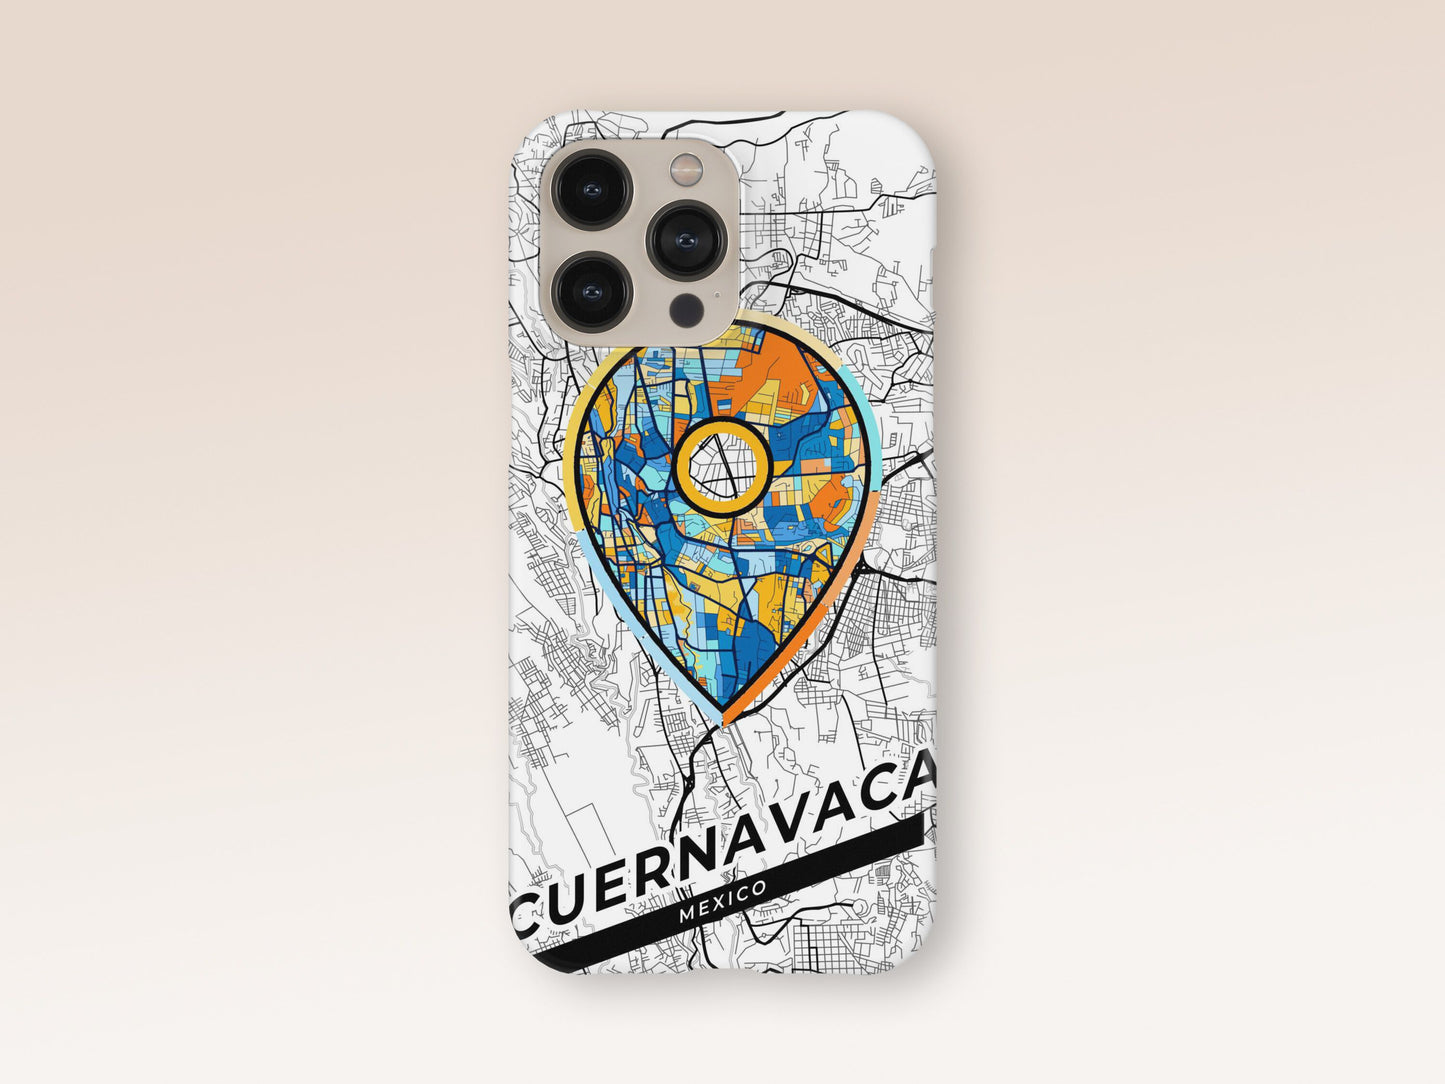 Cuernavaca Mexico slim phone case with colorful icon. Birthday, wedding or housewarming gift. Couple match cases. 1